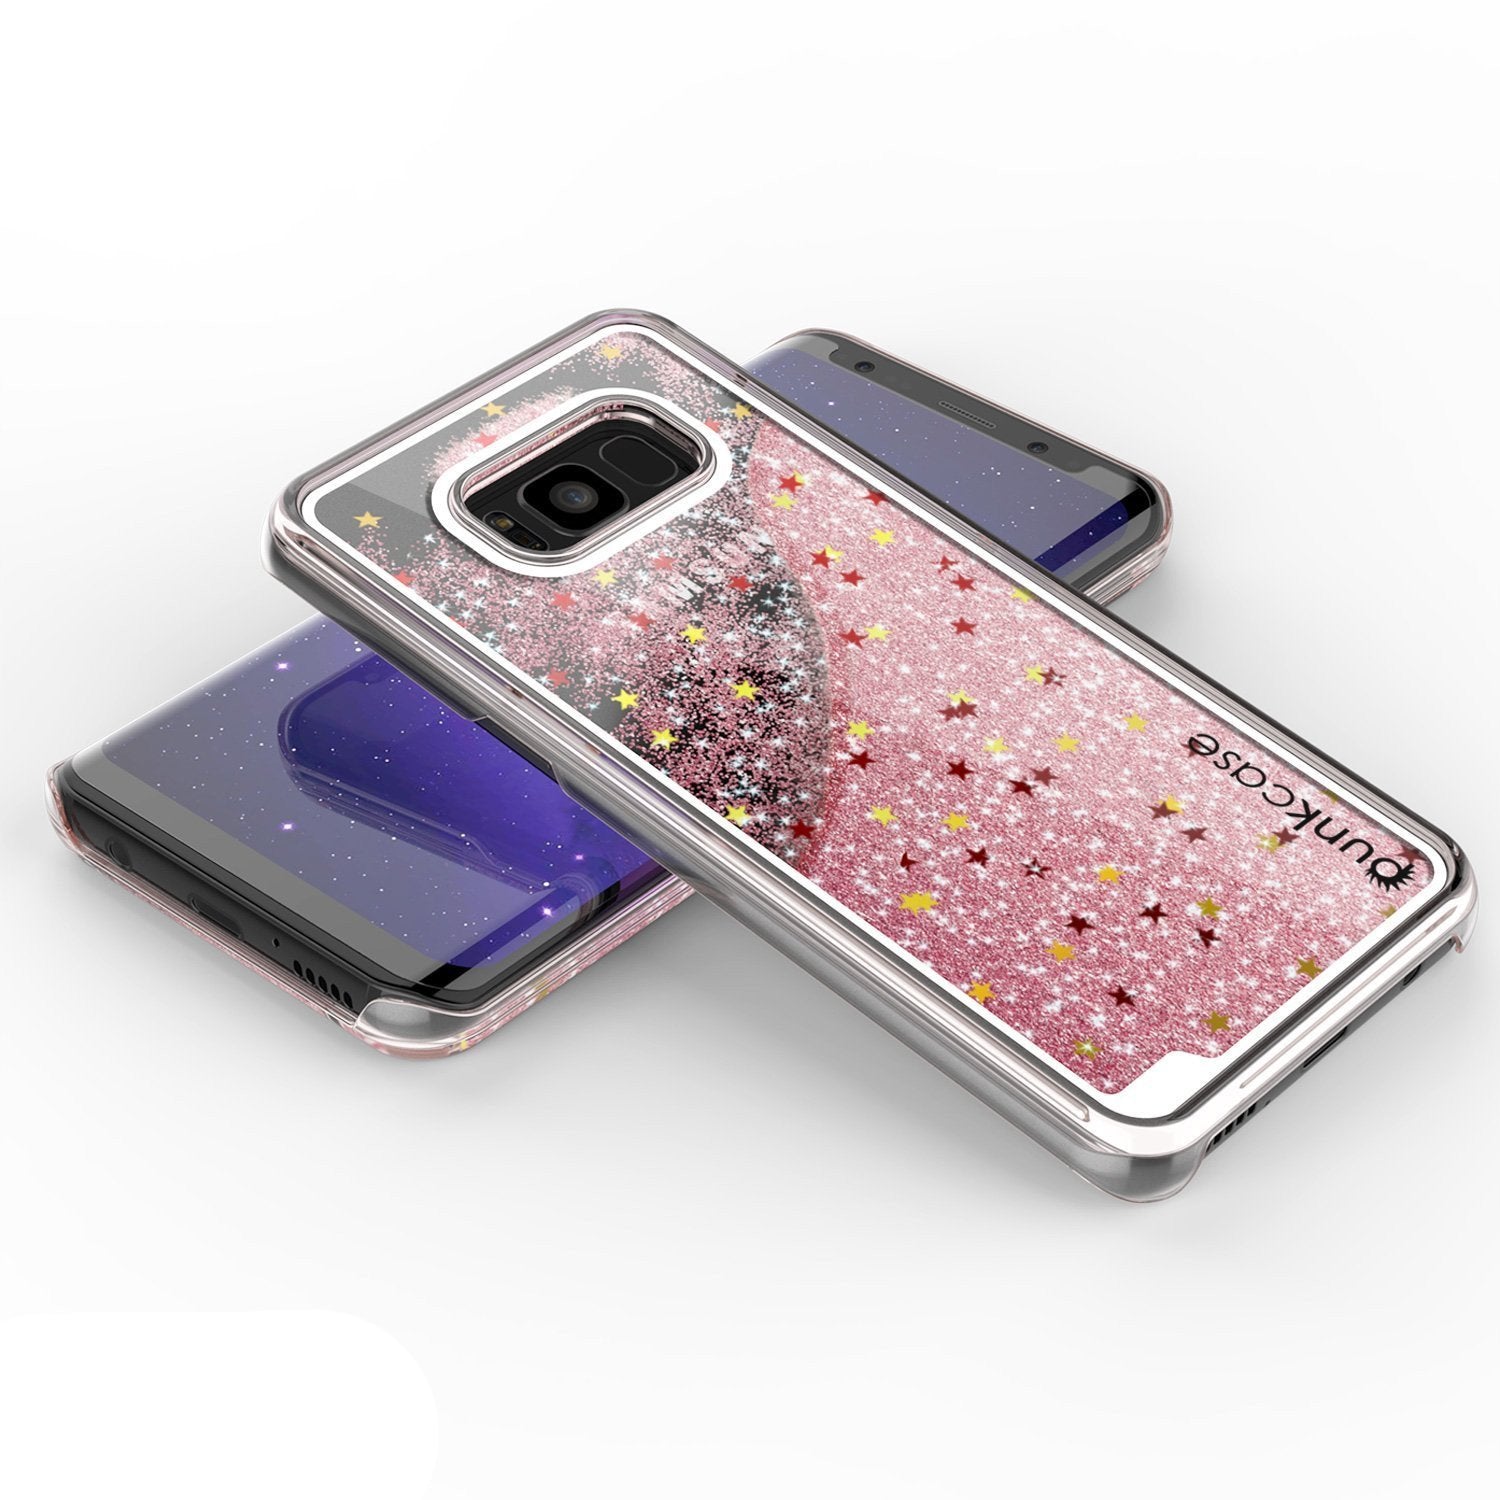 Galaxy S8 Case, Punkcase Liquid Rose Series Protective Glitter Cover